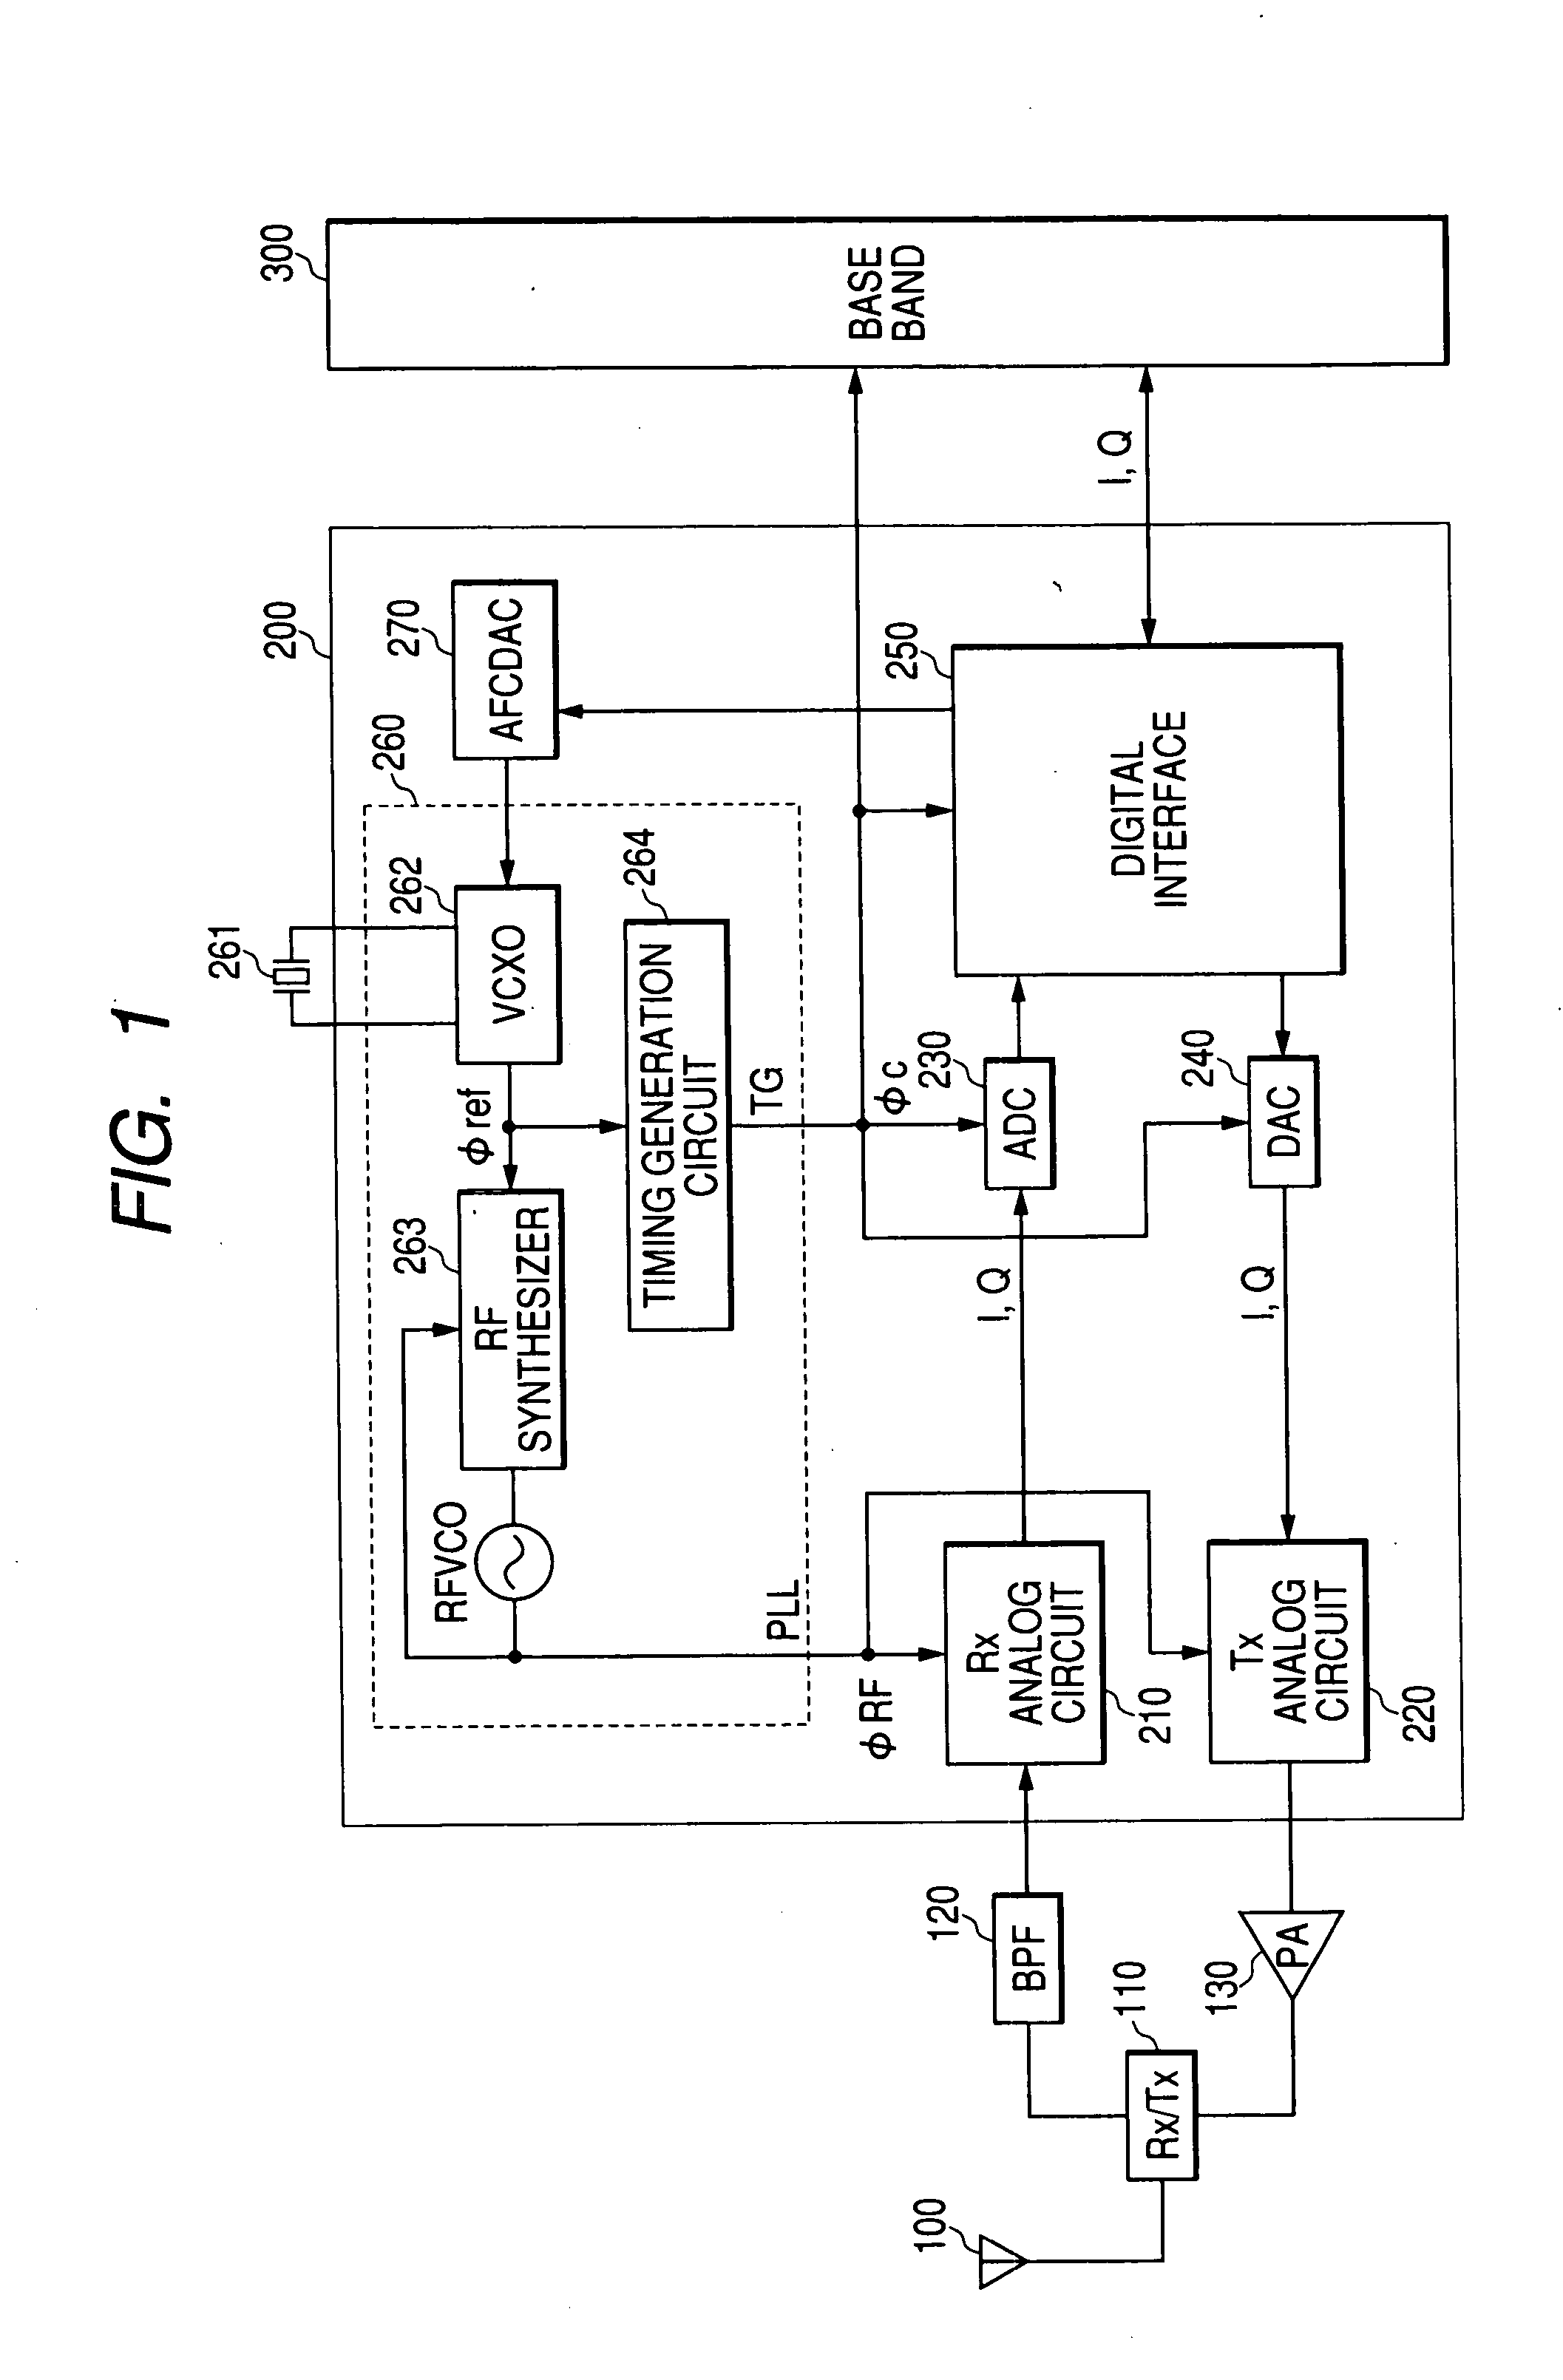 Semiconductor integrated circuit and radio communication apparatus for communication